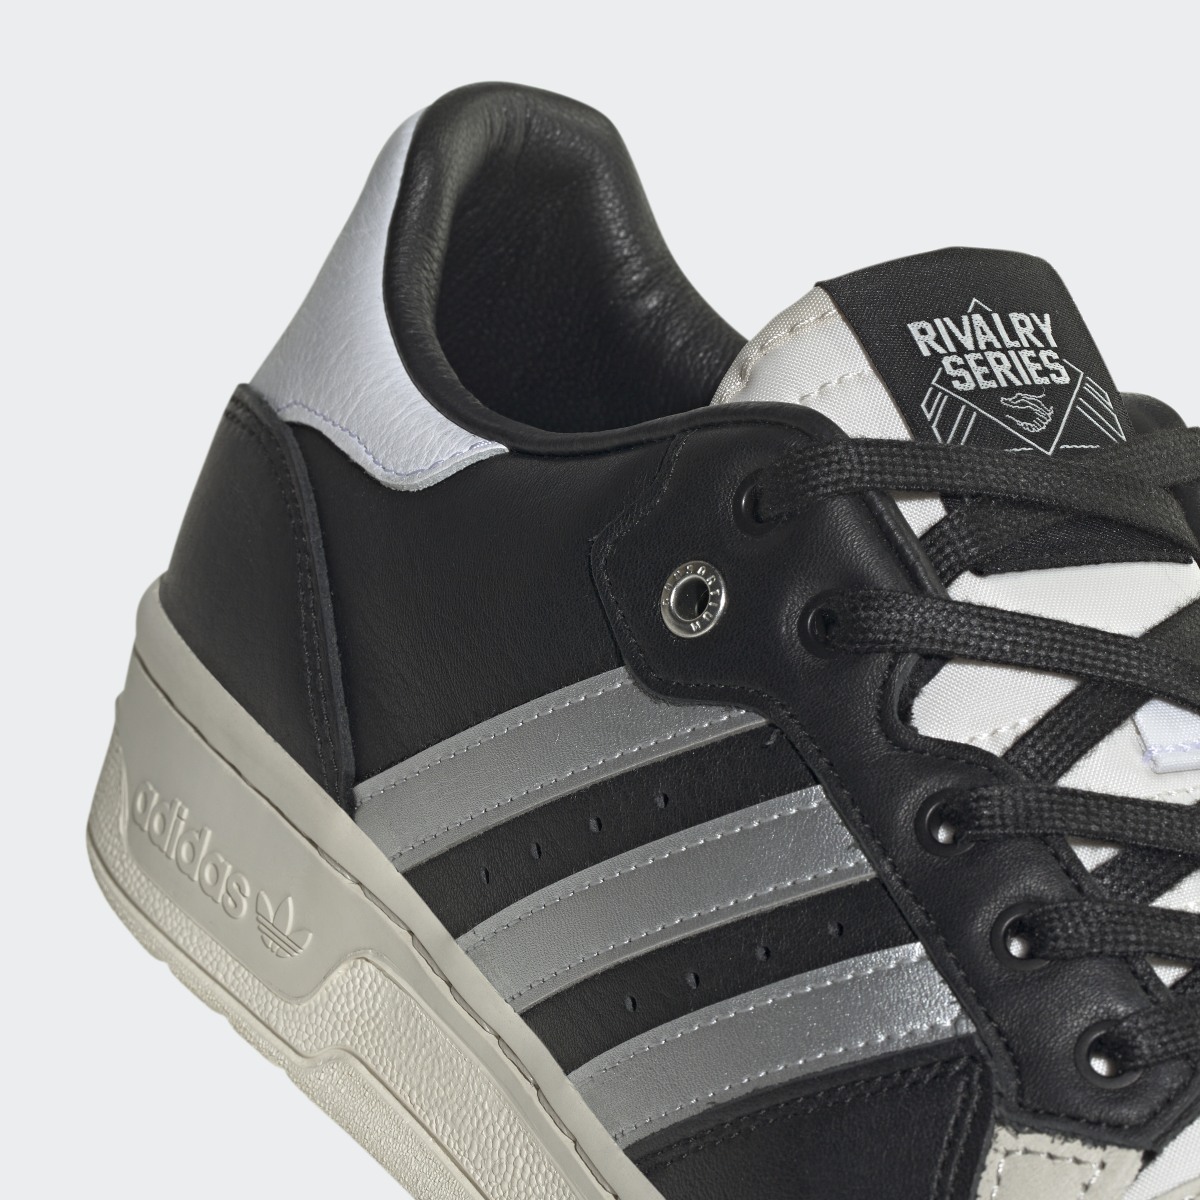 Adidas Rivalry Low Consortium Shoes. 9